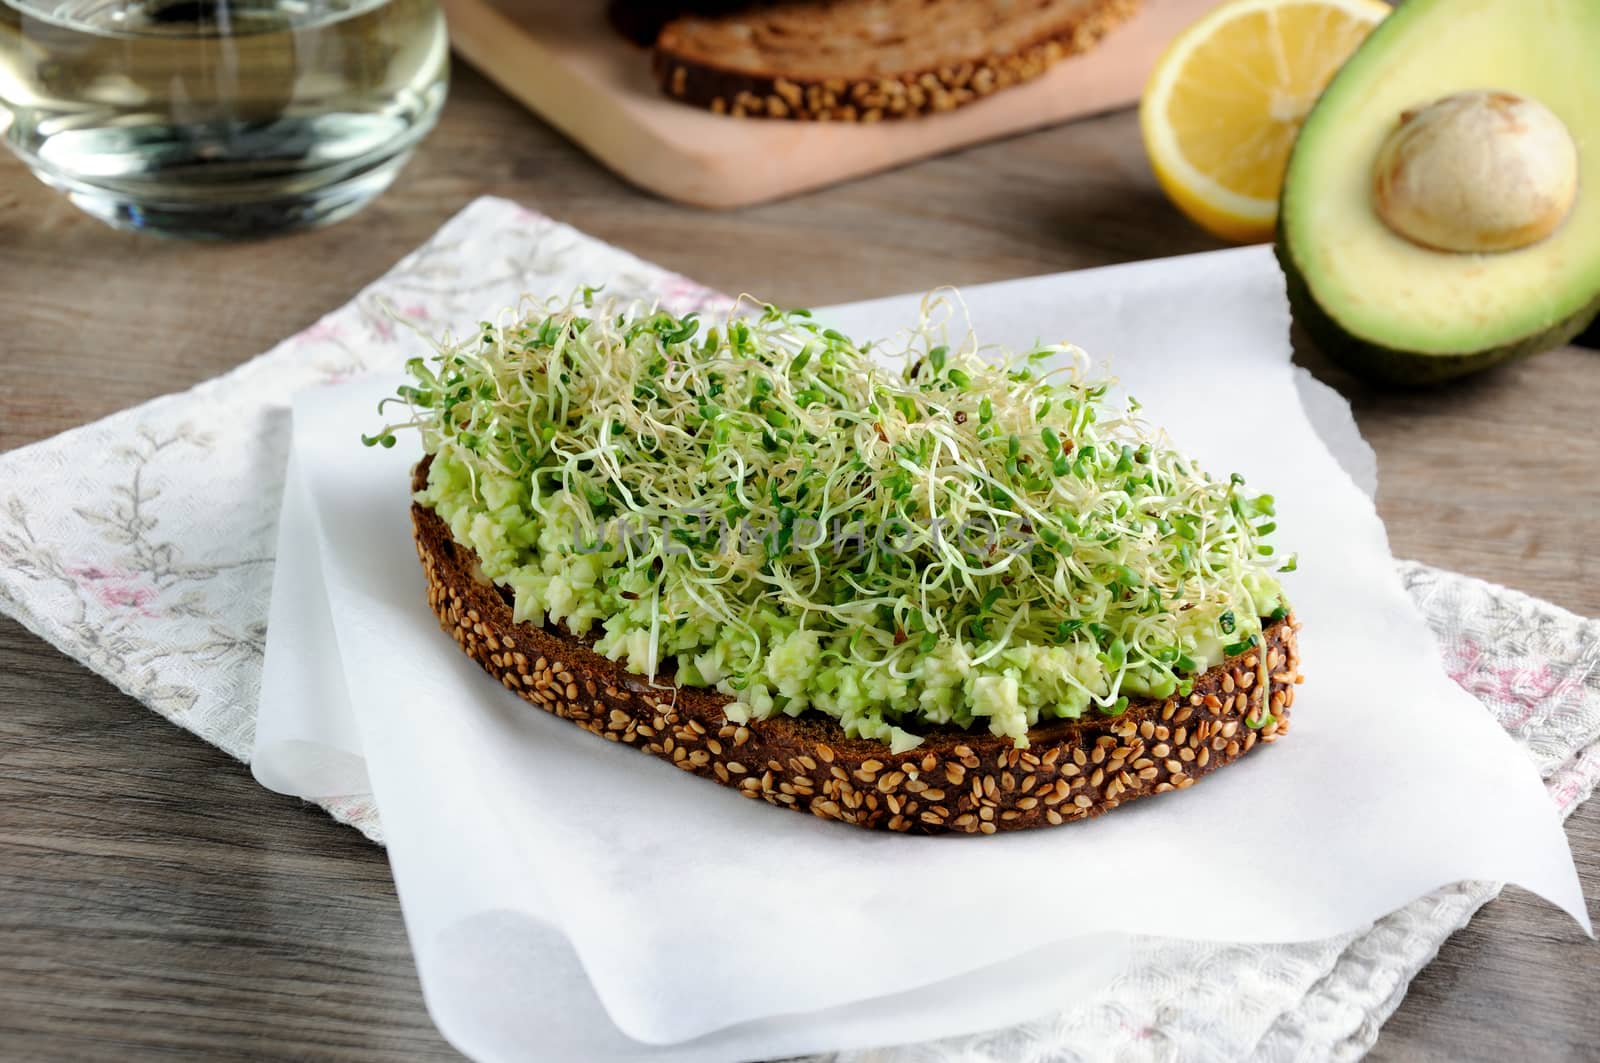 Sandwich with avocado and alfalfa sprouts by Apolonia